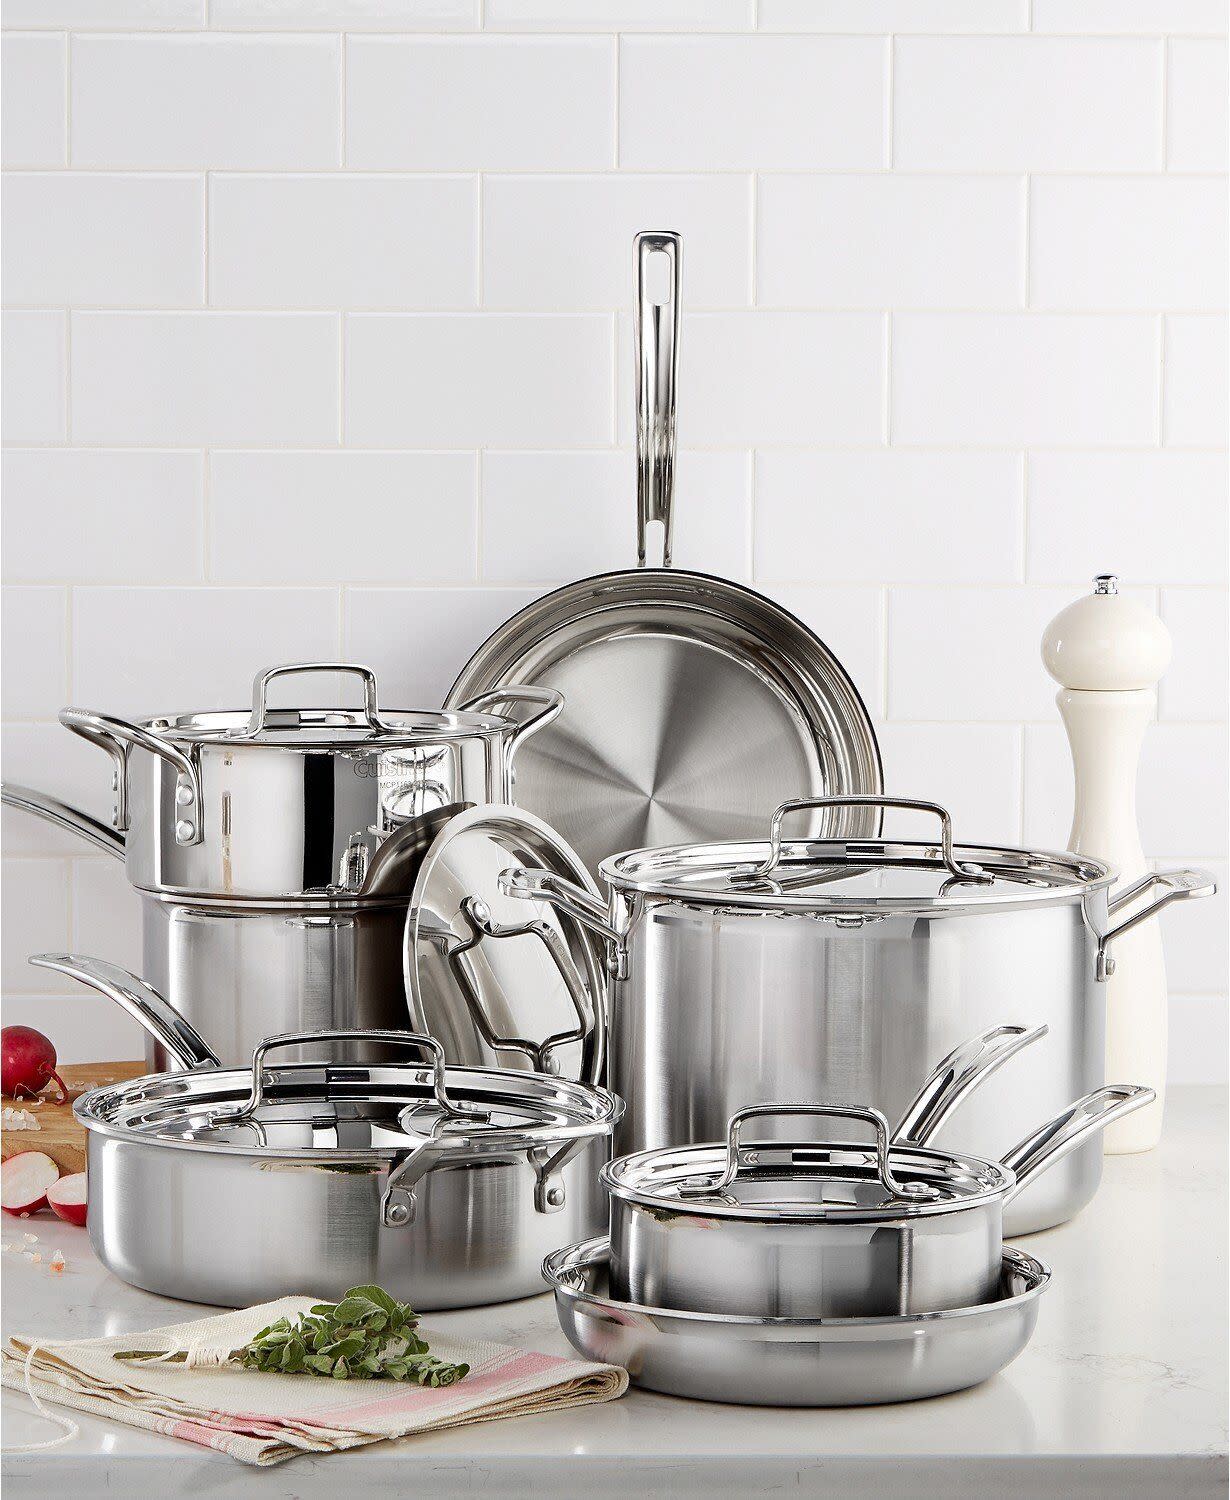 Post-Thanksgiving, you might not want to think about making another feast for awhile. We get it. Still, it can't hurt to have <a href="https://www.huffpost.com/entry/black-friday-cookware-deals-2020_l_5fad8df1c5b635e9dea03562" target="_blank" rel="noopener noreferrer">new pots and pans around</a> for when you see a new NYT Cooking recipe on Instagram. Not only is this <a href="https://fave.co/3fTQfQD" target="_blank" rel="noopener noreferrer">12-piece Cuisinart cookware set</a> well-reviewed, but it's also 40% off right now. It includes two sauce pans, two skillets, a stockpot and more. Each of them is made from stainless steel. <a href="https://fave.co/3lpZokP" target="_blank" rel="noopener noreferrer">Originally $500, get it now for $300 at Macy's</a>.